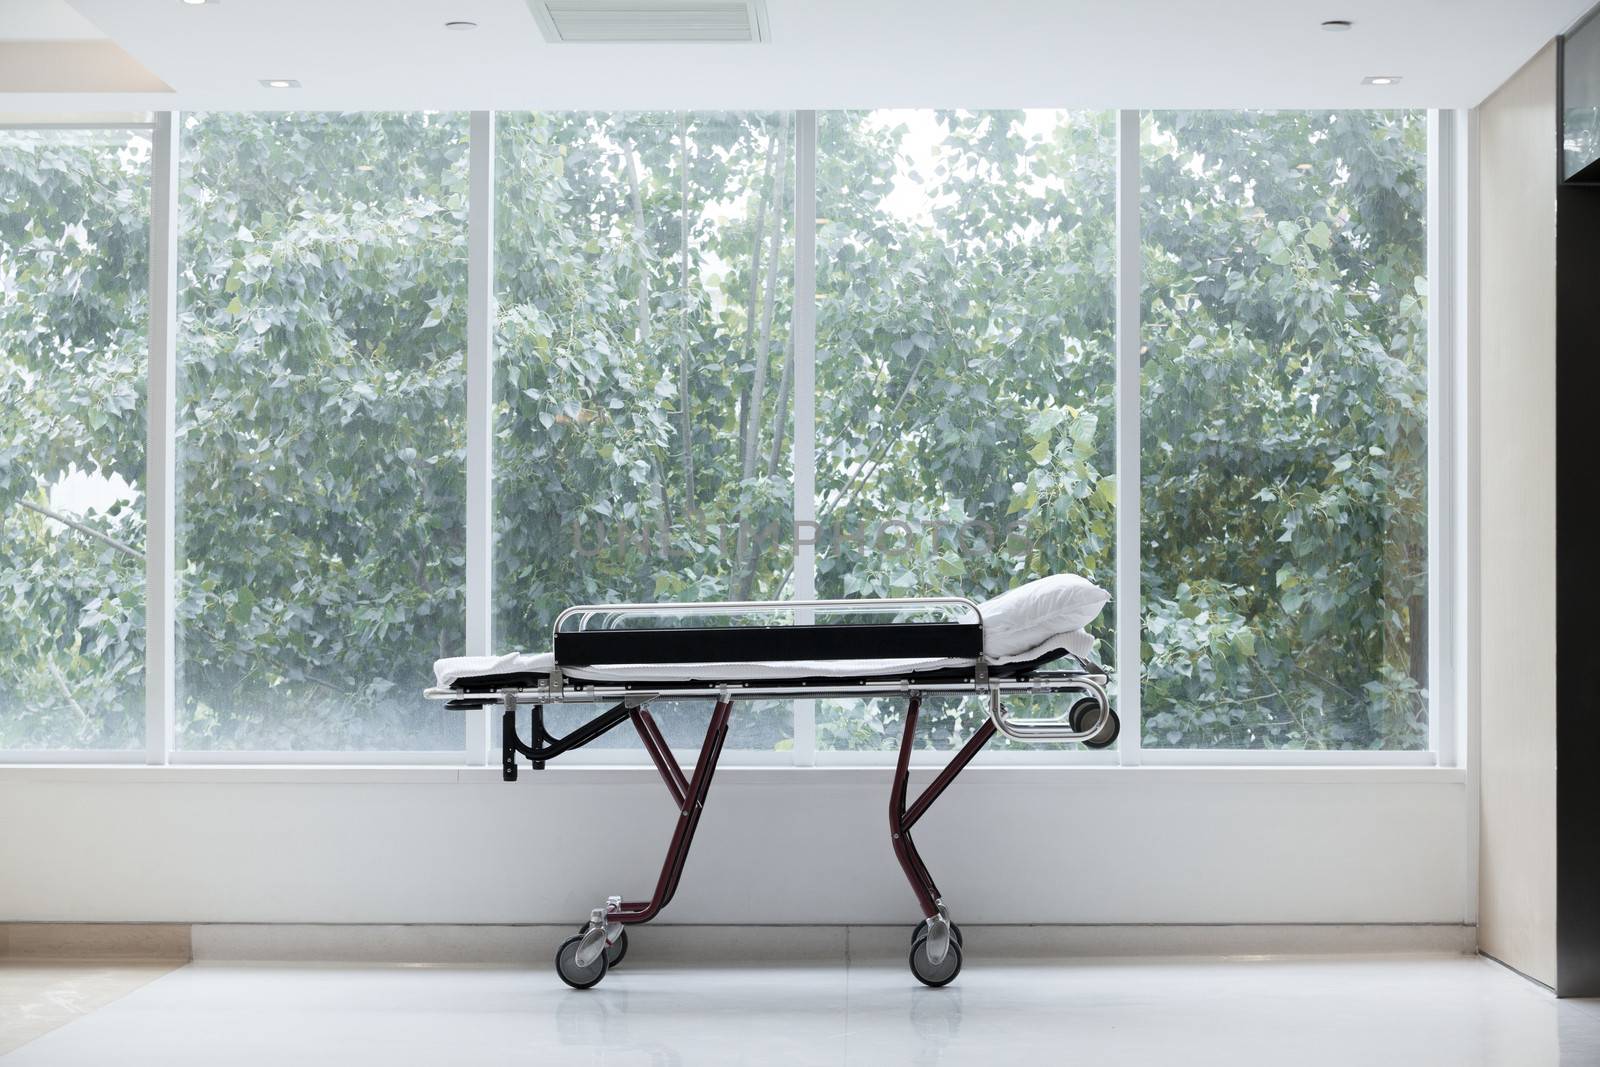 Empty stretcher in a hospital by glass windows, no people by XiXinXing